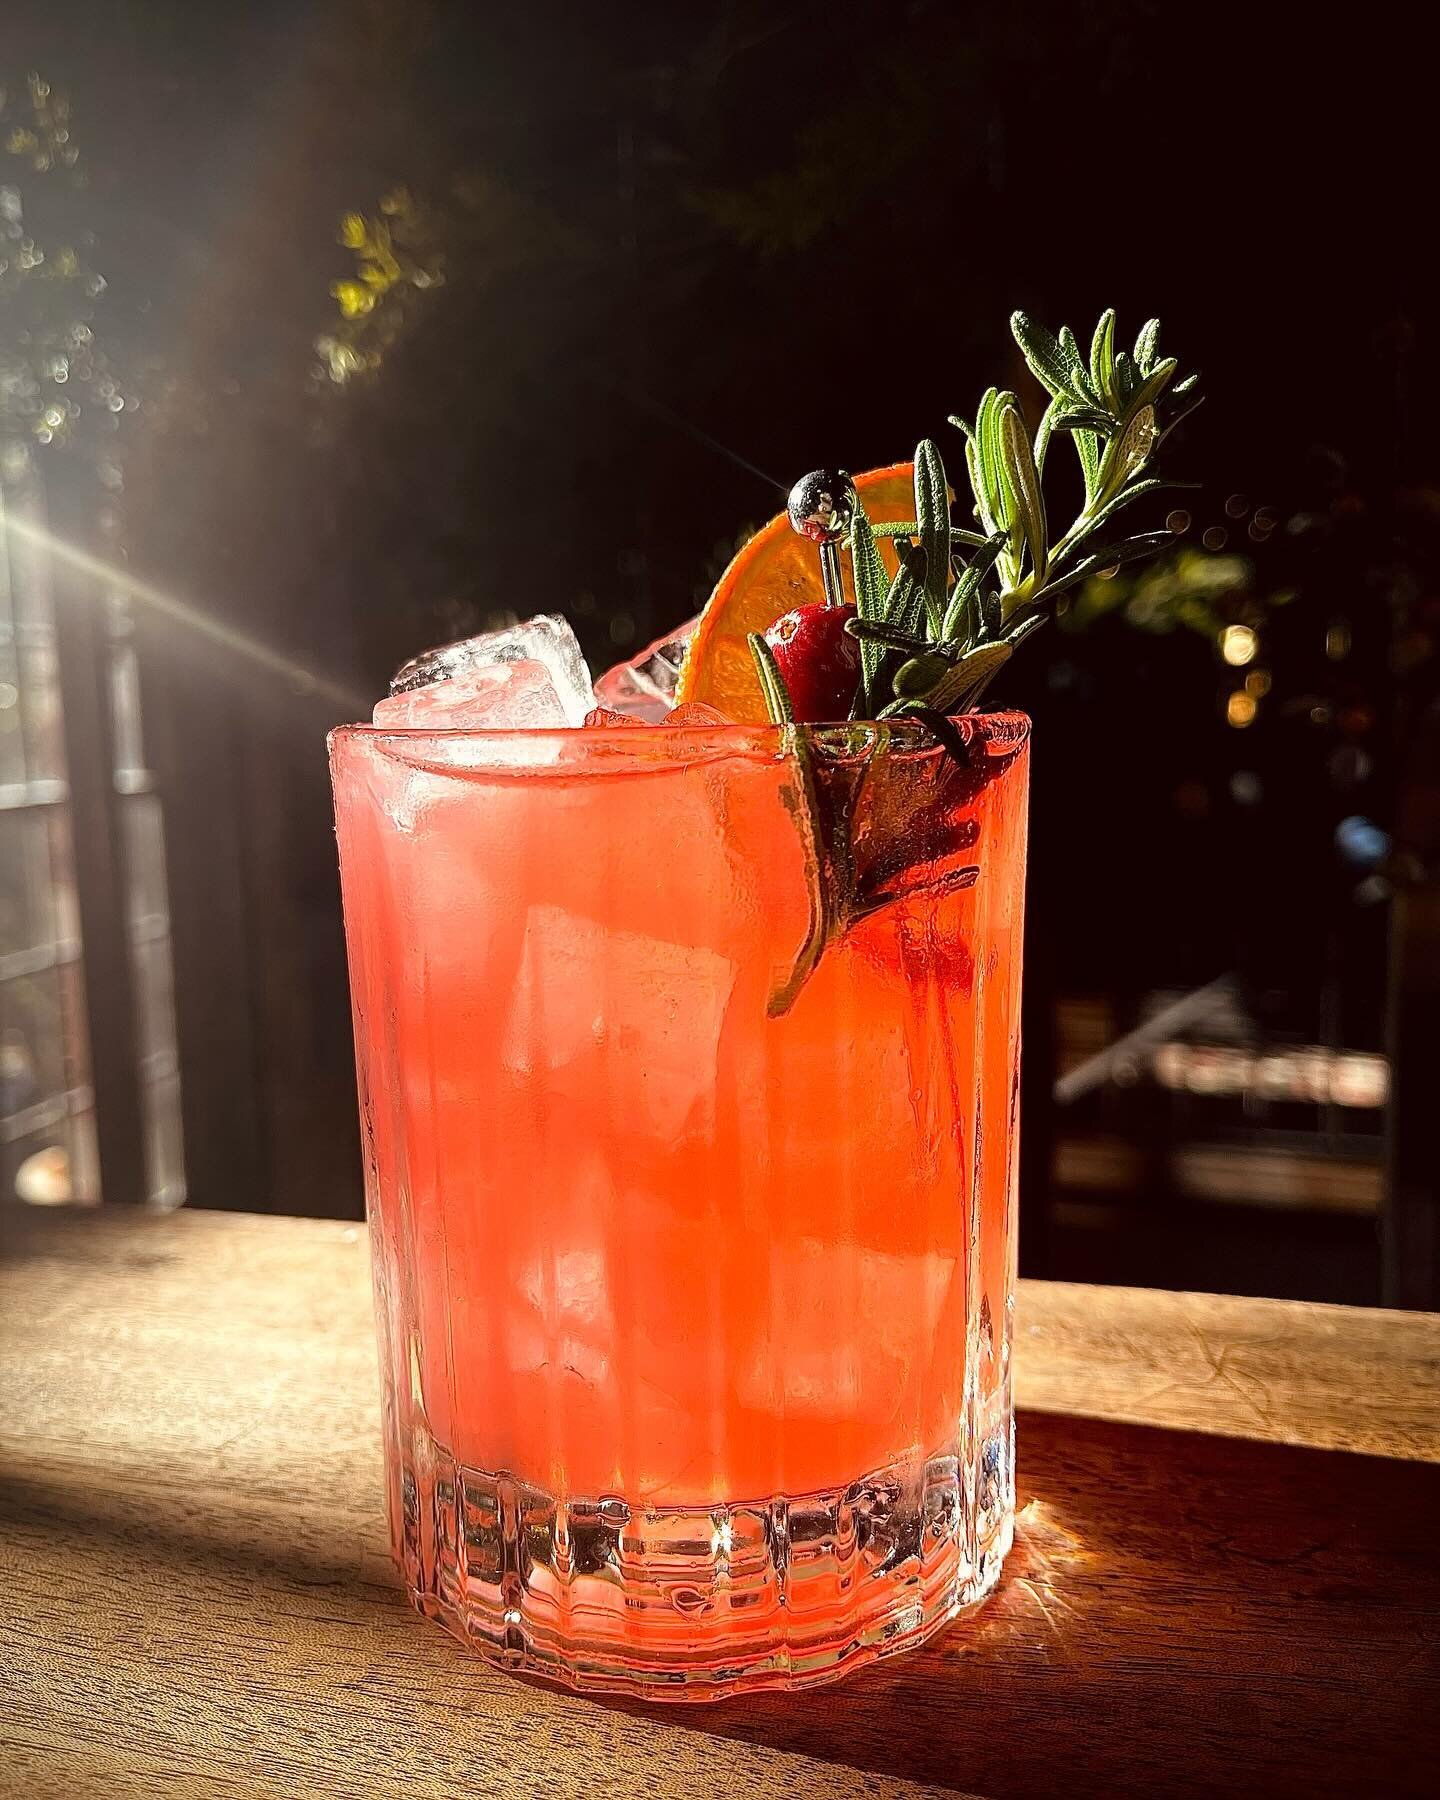 Today, we enjoyed hosting our friends @visitsacramento Holiday Cocktail party featuring a cocktail special called Farm to Fork. It&rsquo;s made with Sacramento distilled @hornbrookgin gin, orange oleo, roasted cranberry rosemary cordial, cinnamon and